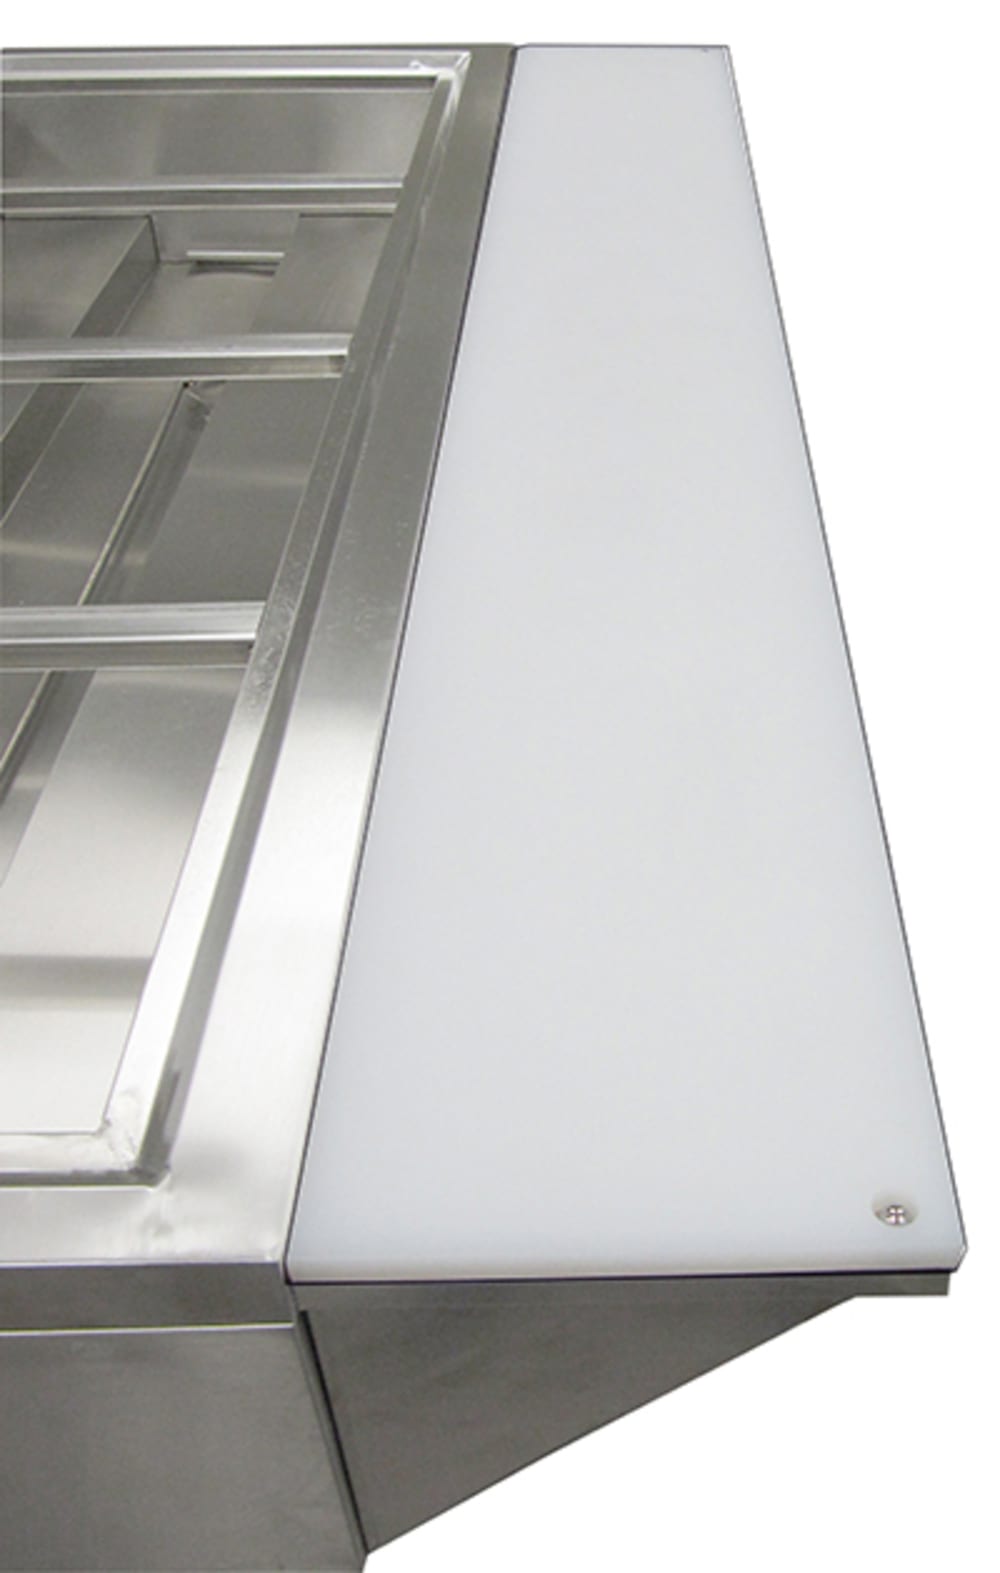 Adcraft EST-240/PCB Poly Cutting Board and Stainless Steel Shelf for EST-240